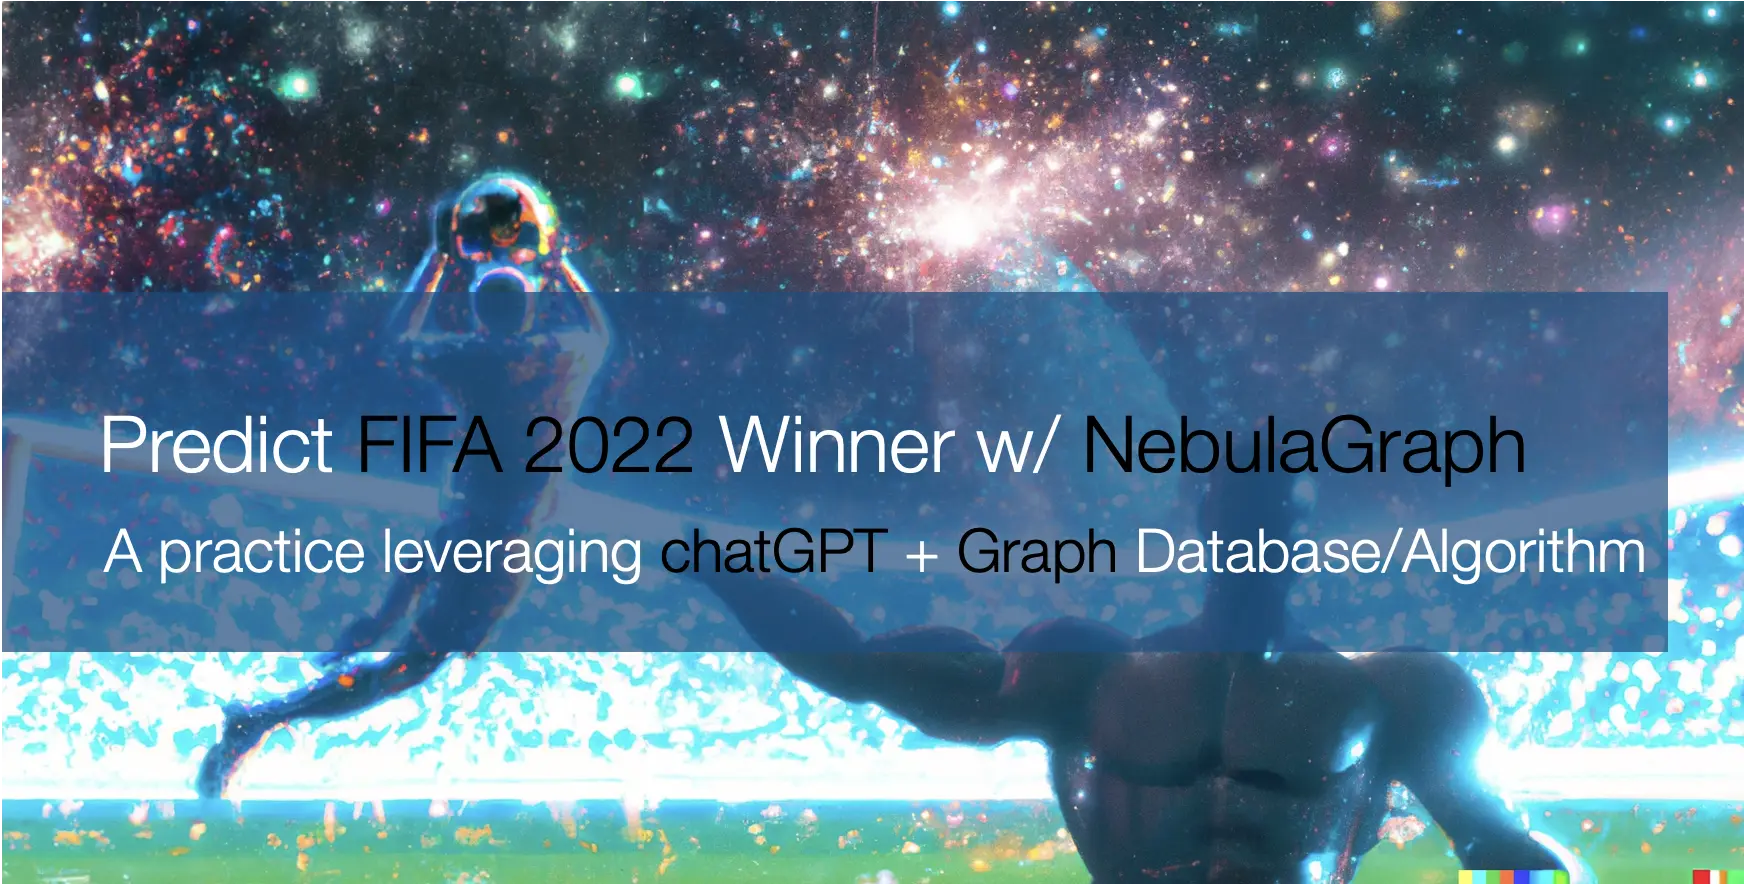 An attempt to use ChatGPT to generate code for a data scraper to predict sports events with the help of the NebulaGraph graph database and graph algorithms.